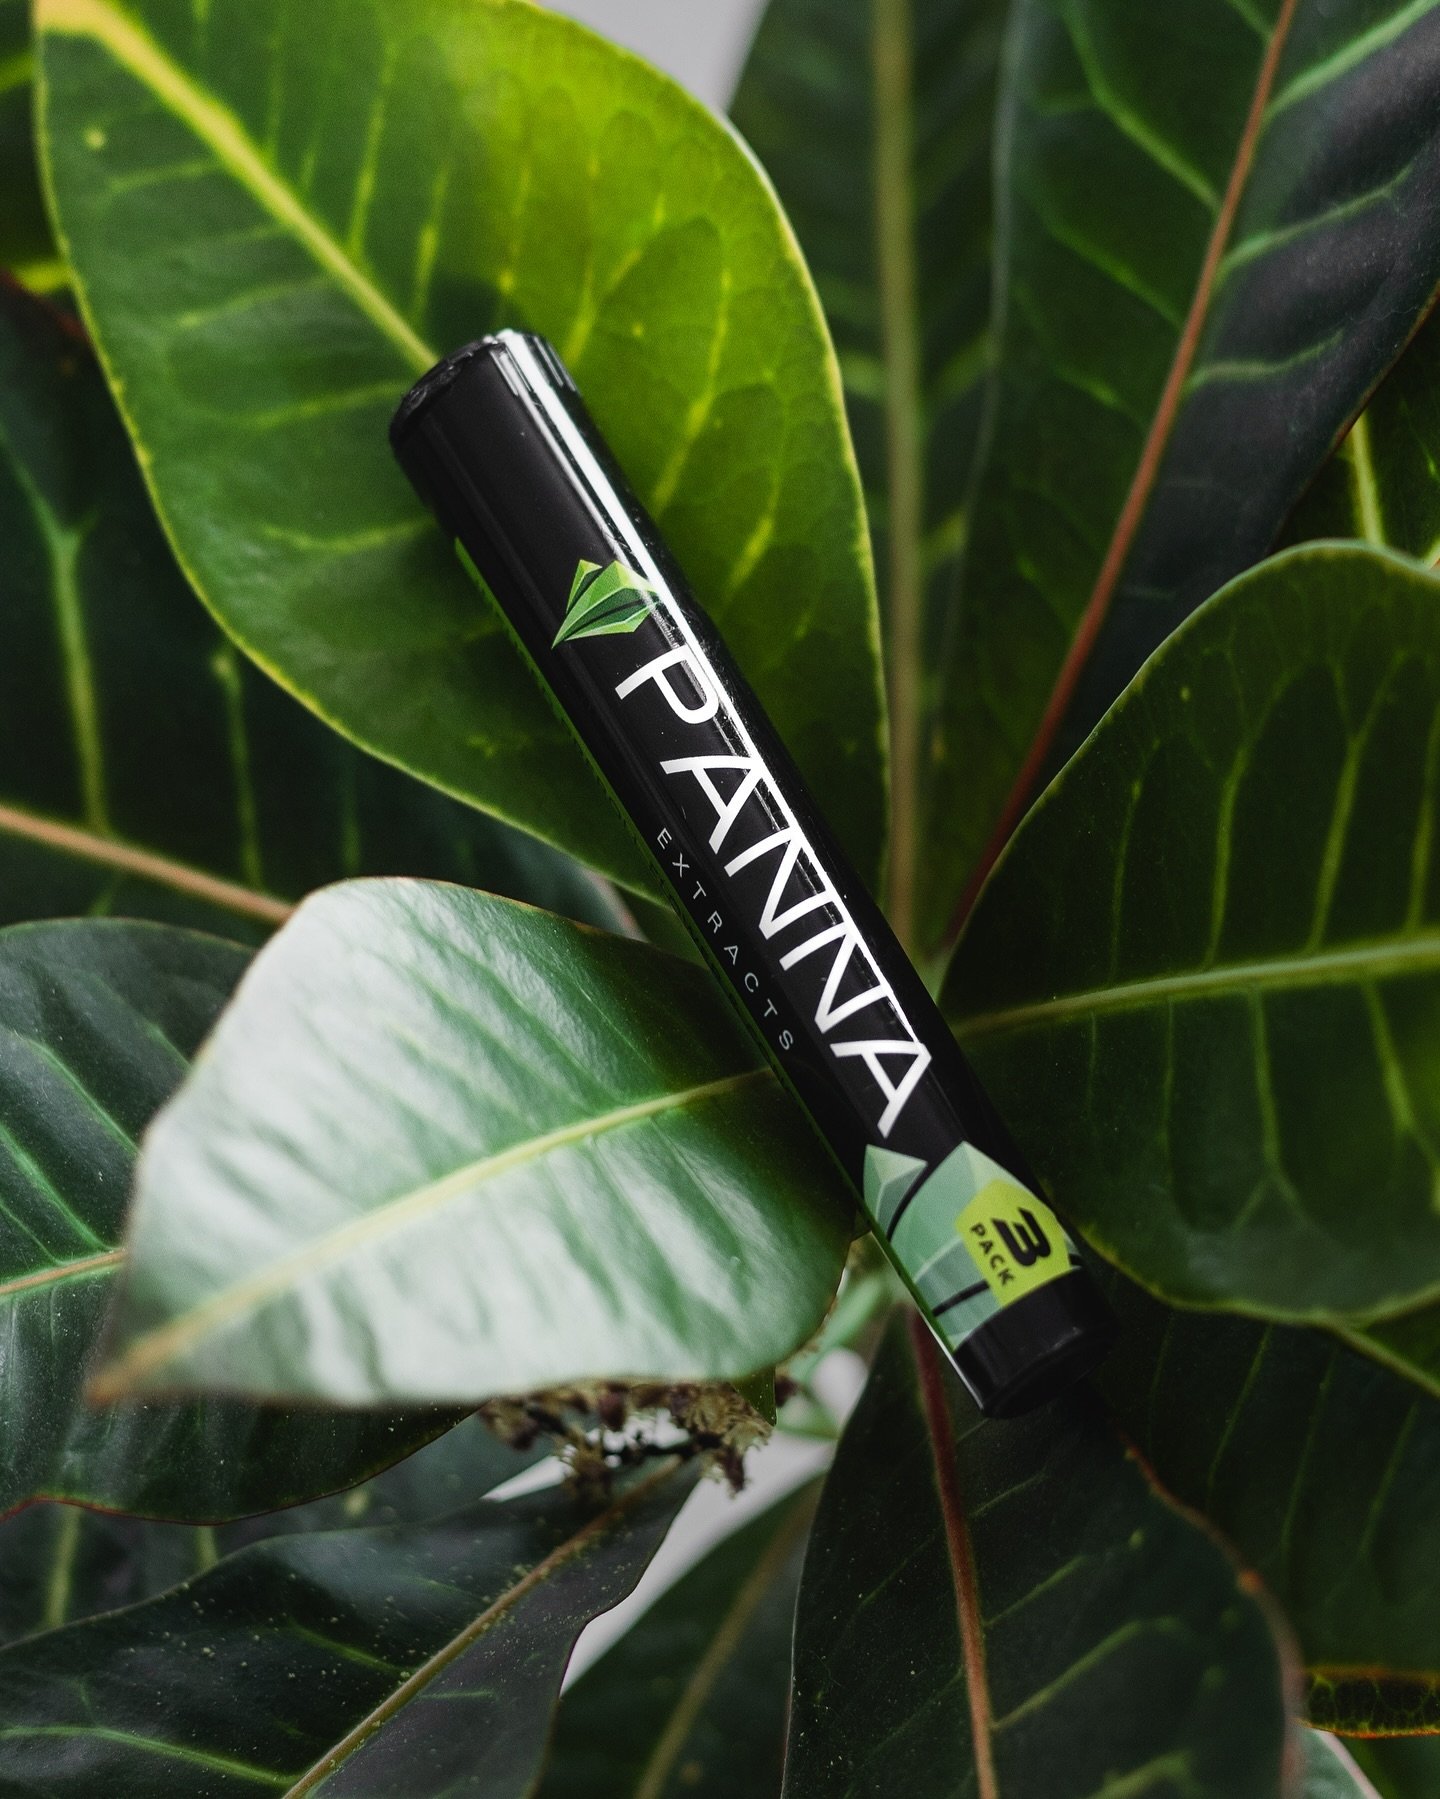 Don&rsquo;t forget your daily greens🌿

#panna #local #lit #legit